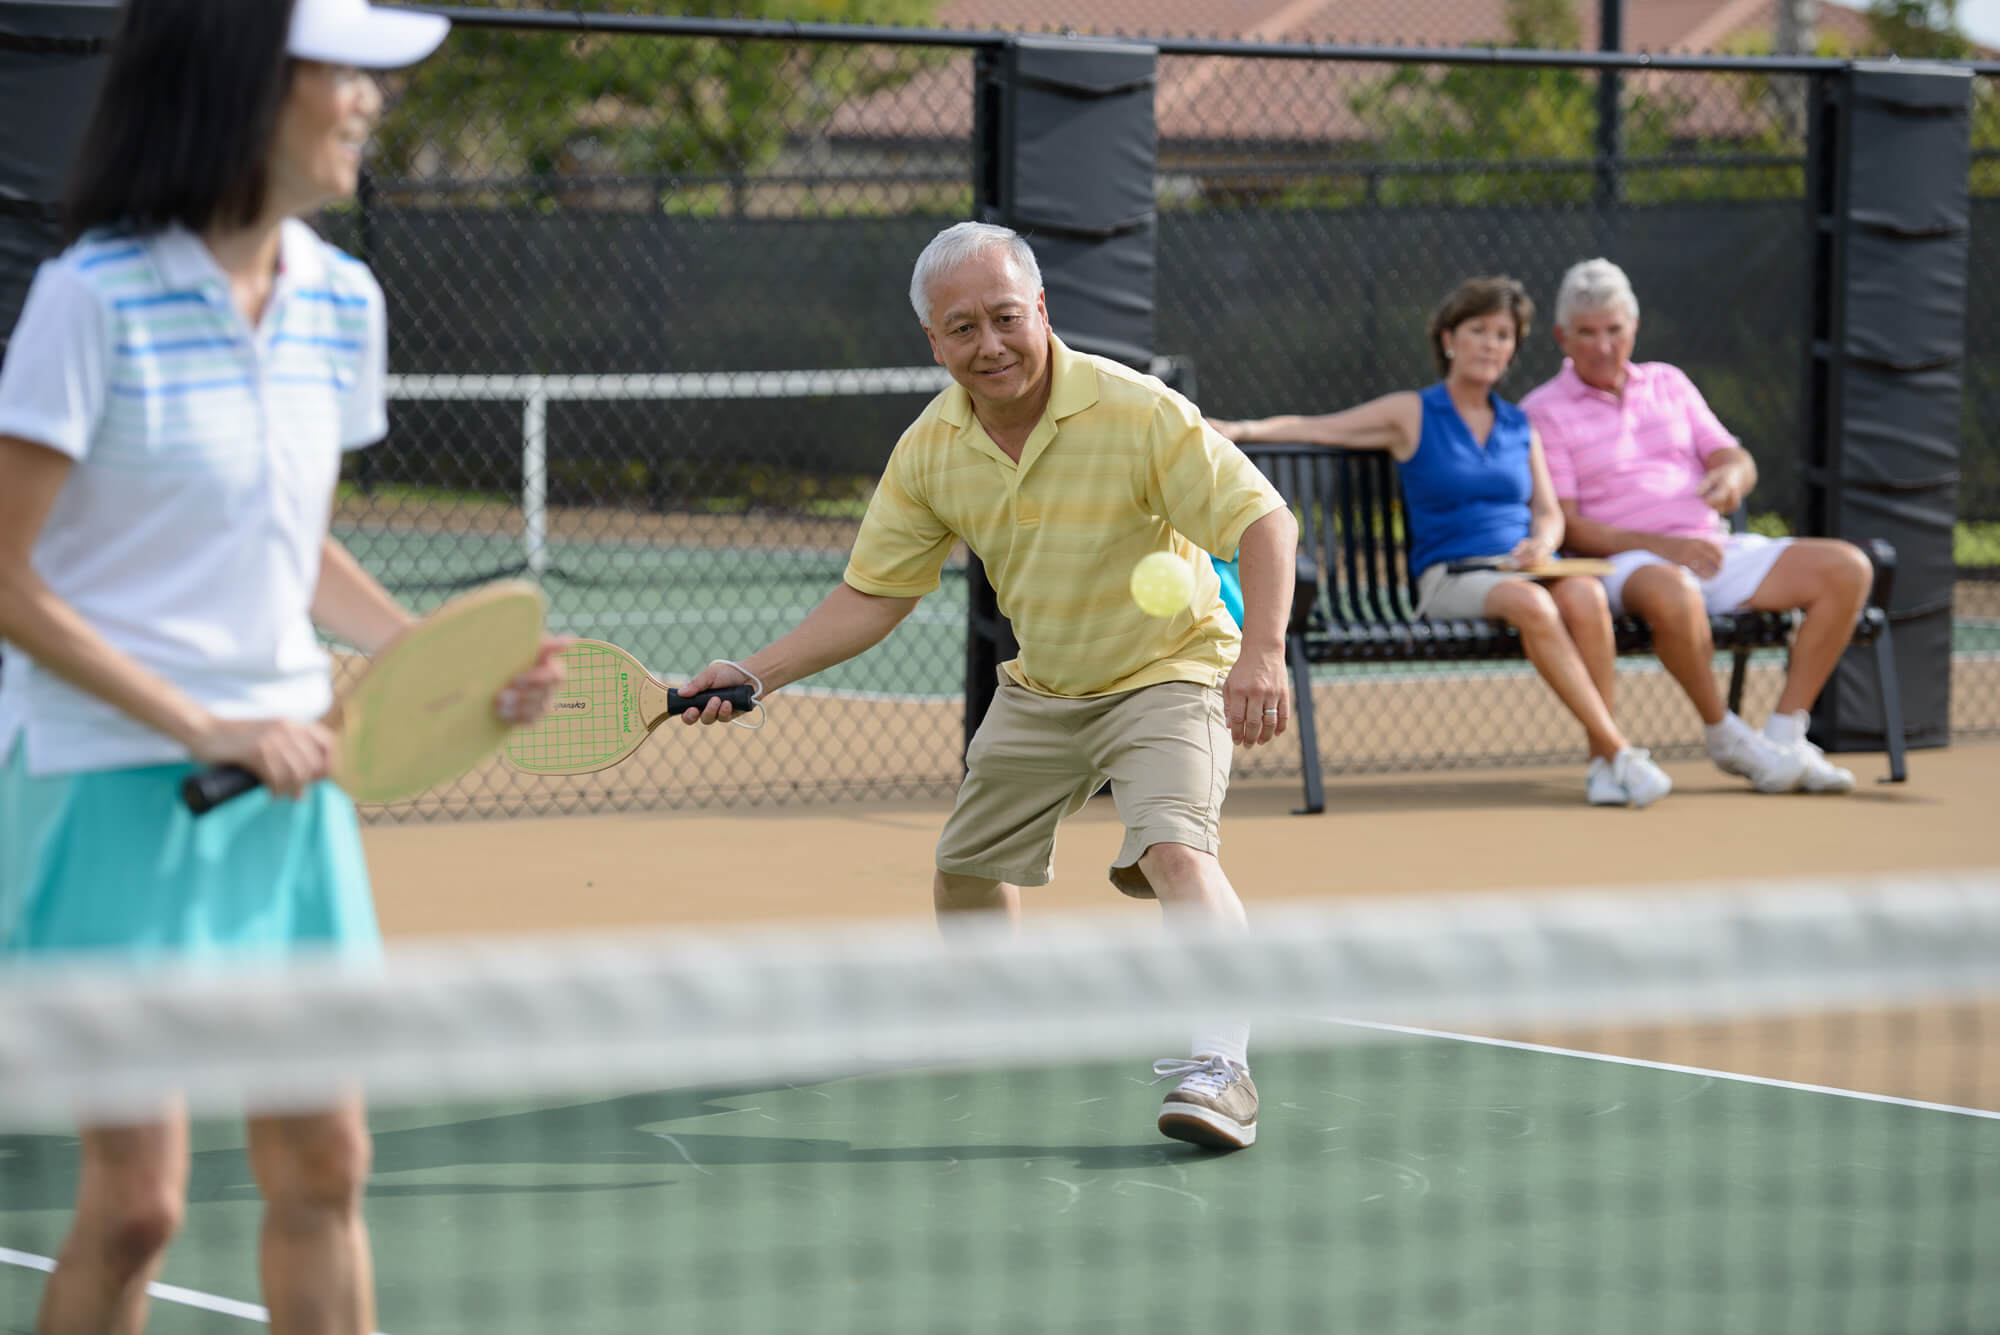 New to pickleball? Don’t worry. We’ll show you the ropes.